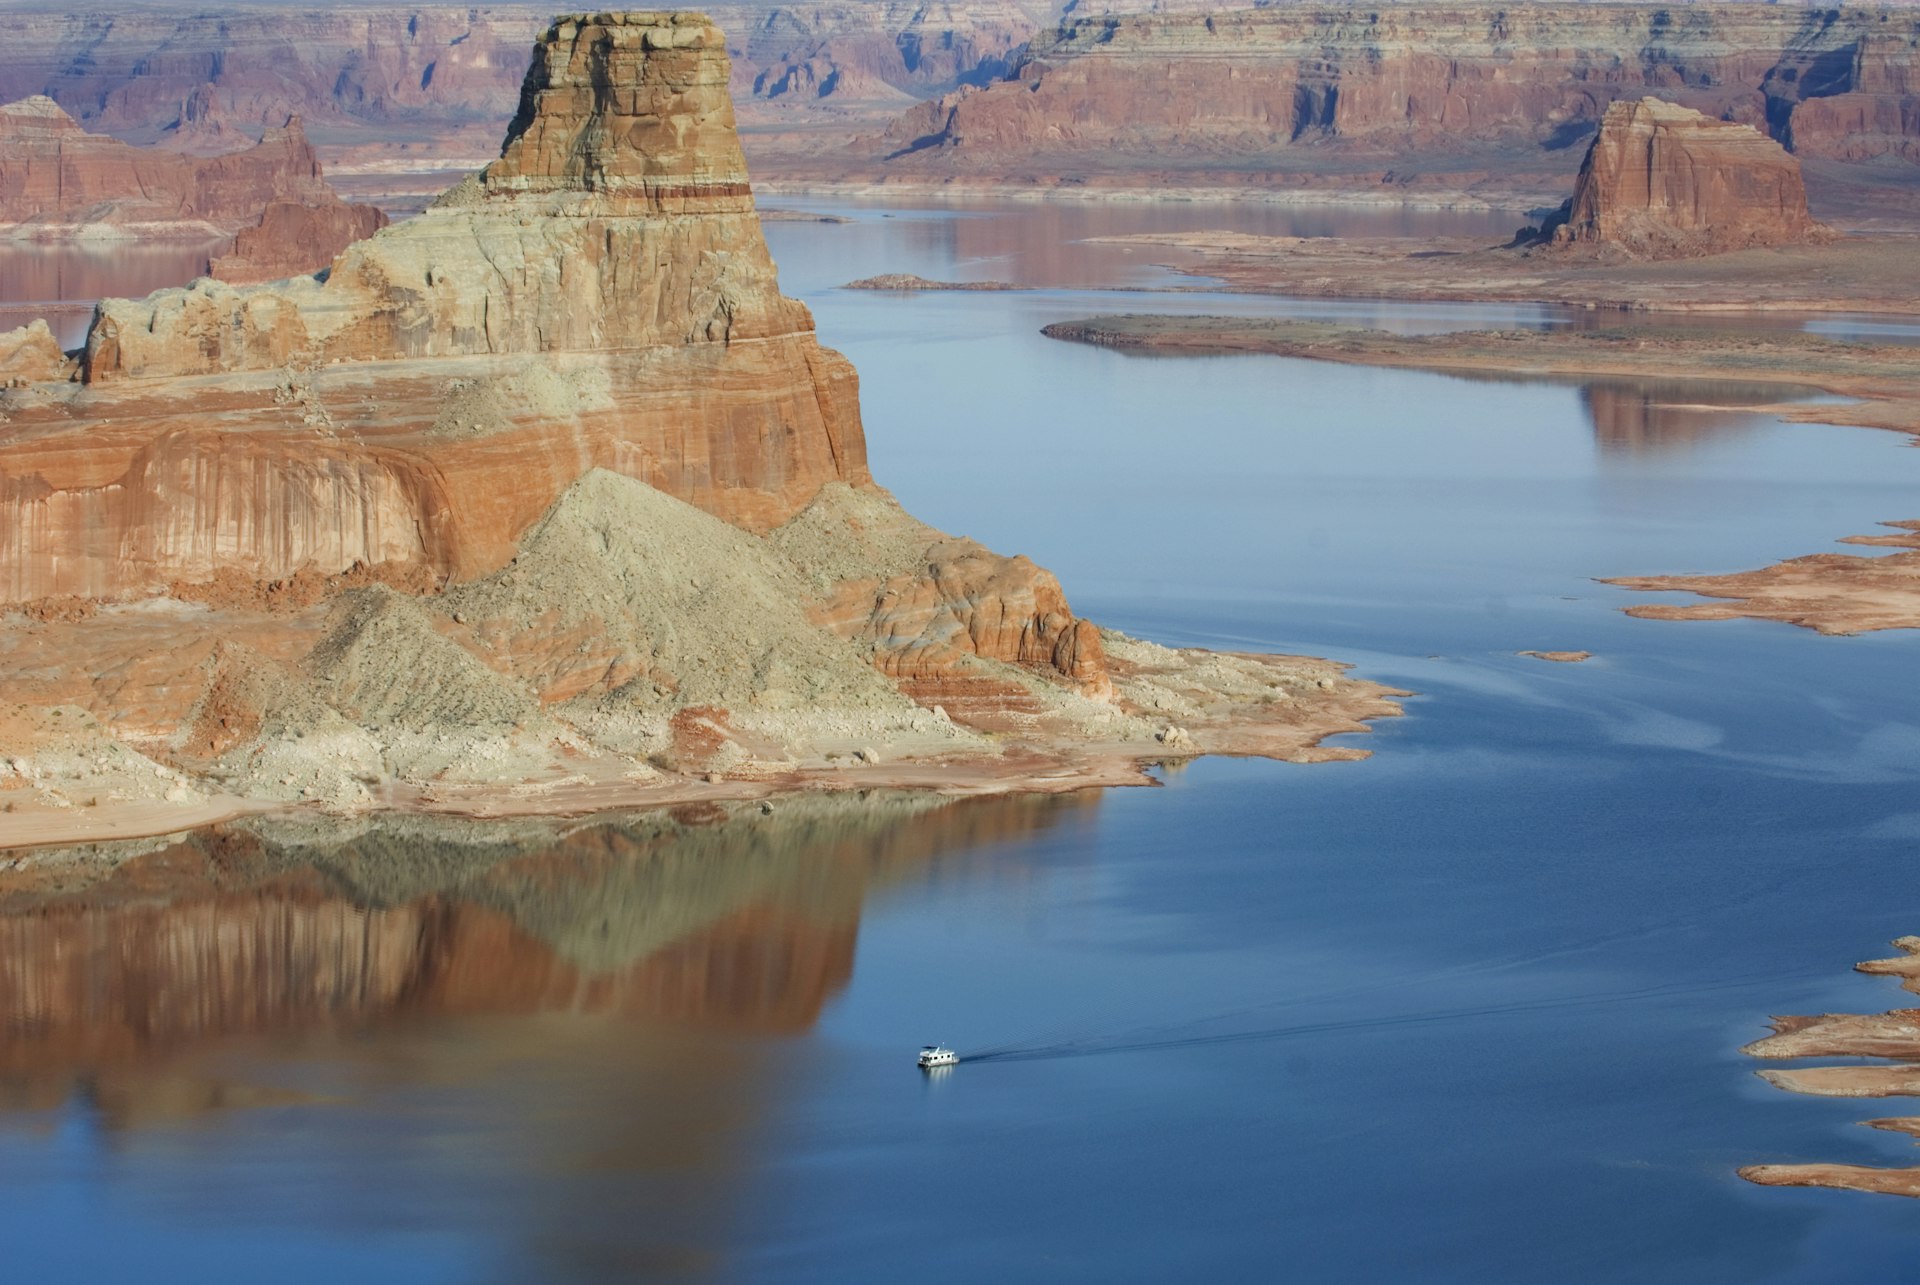 A houseboat navigates the towering canyons in Lake Powell